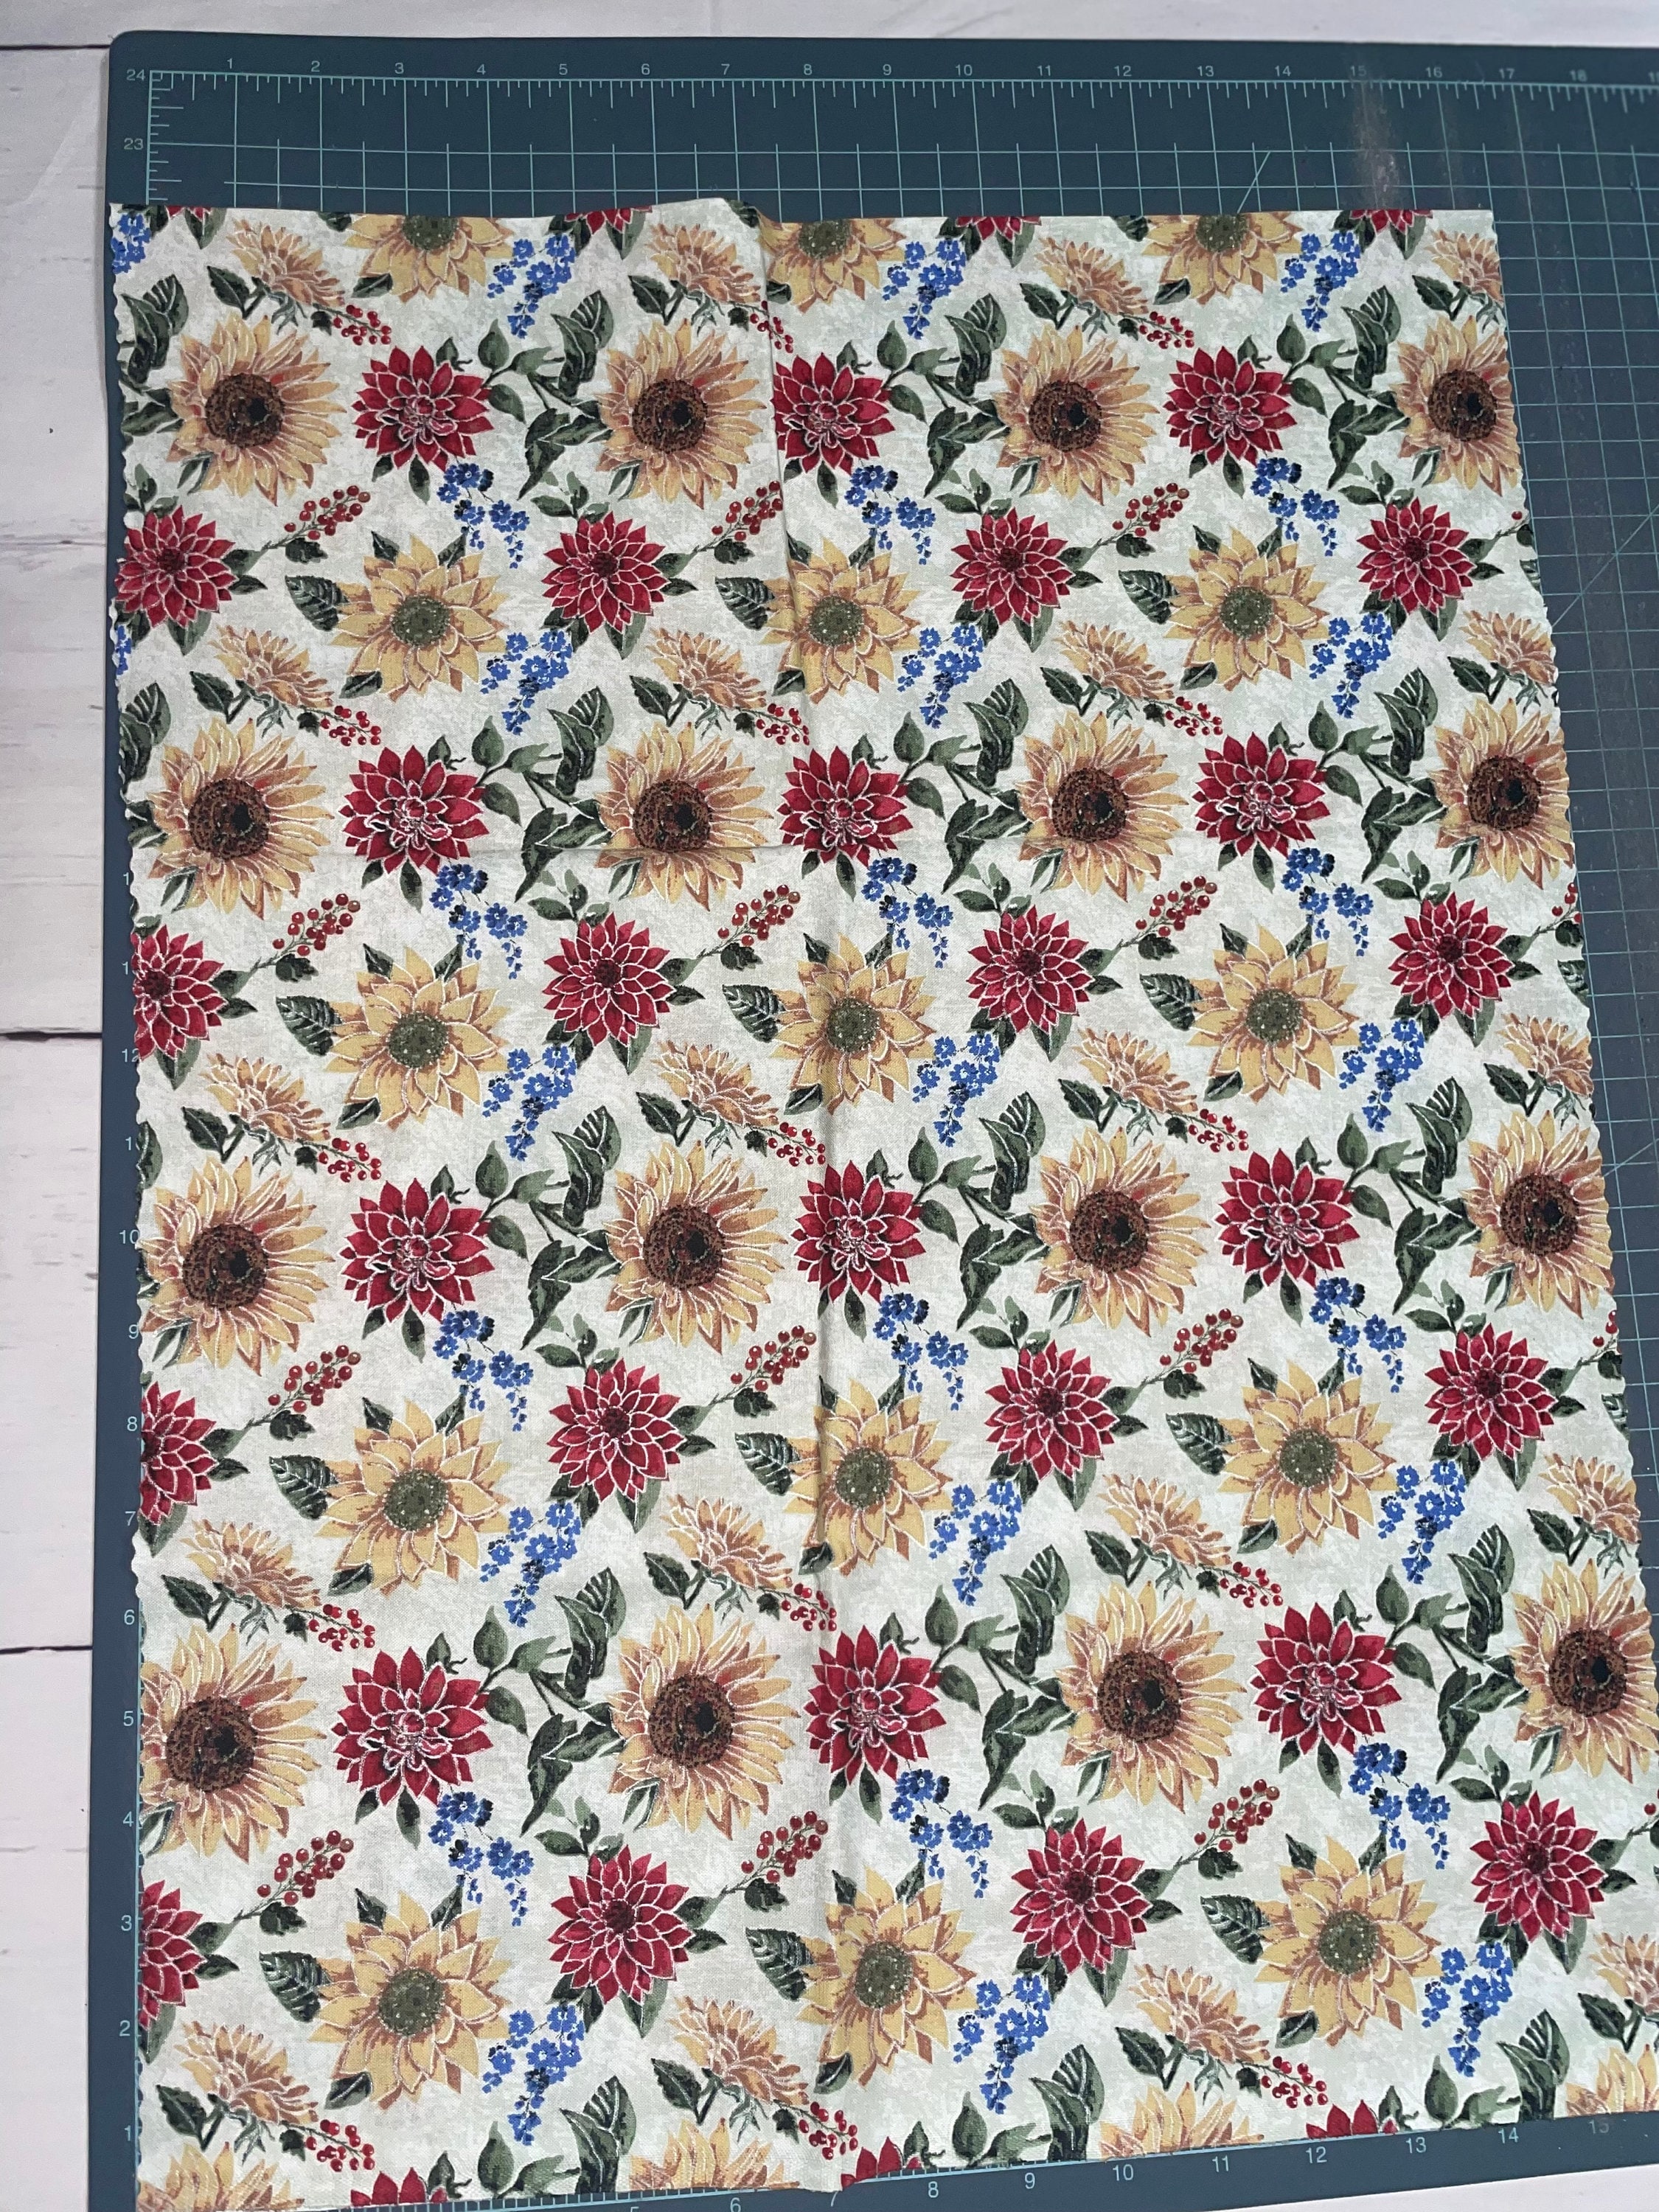 Fall Splendor Brown Sunflower Fabric 28401-A from Quilting Treasures by The Yard